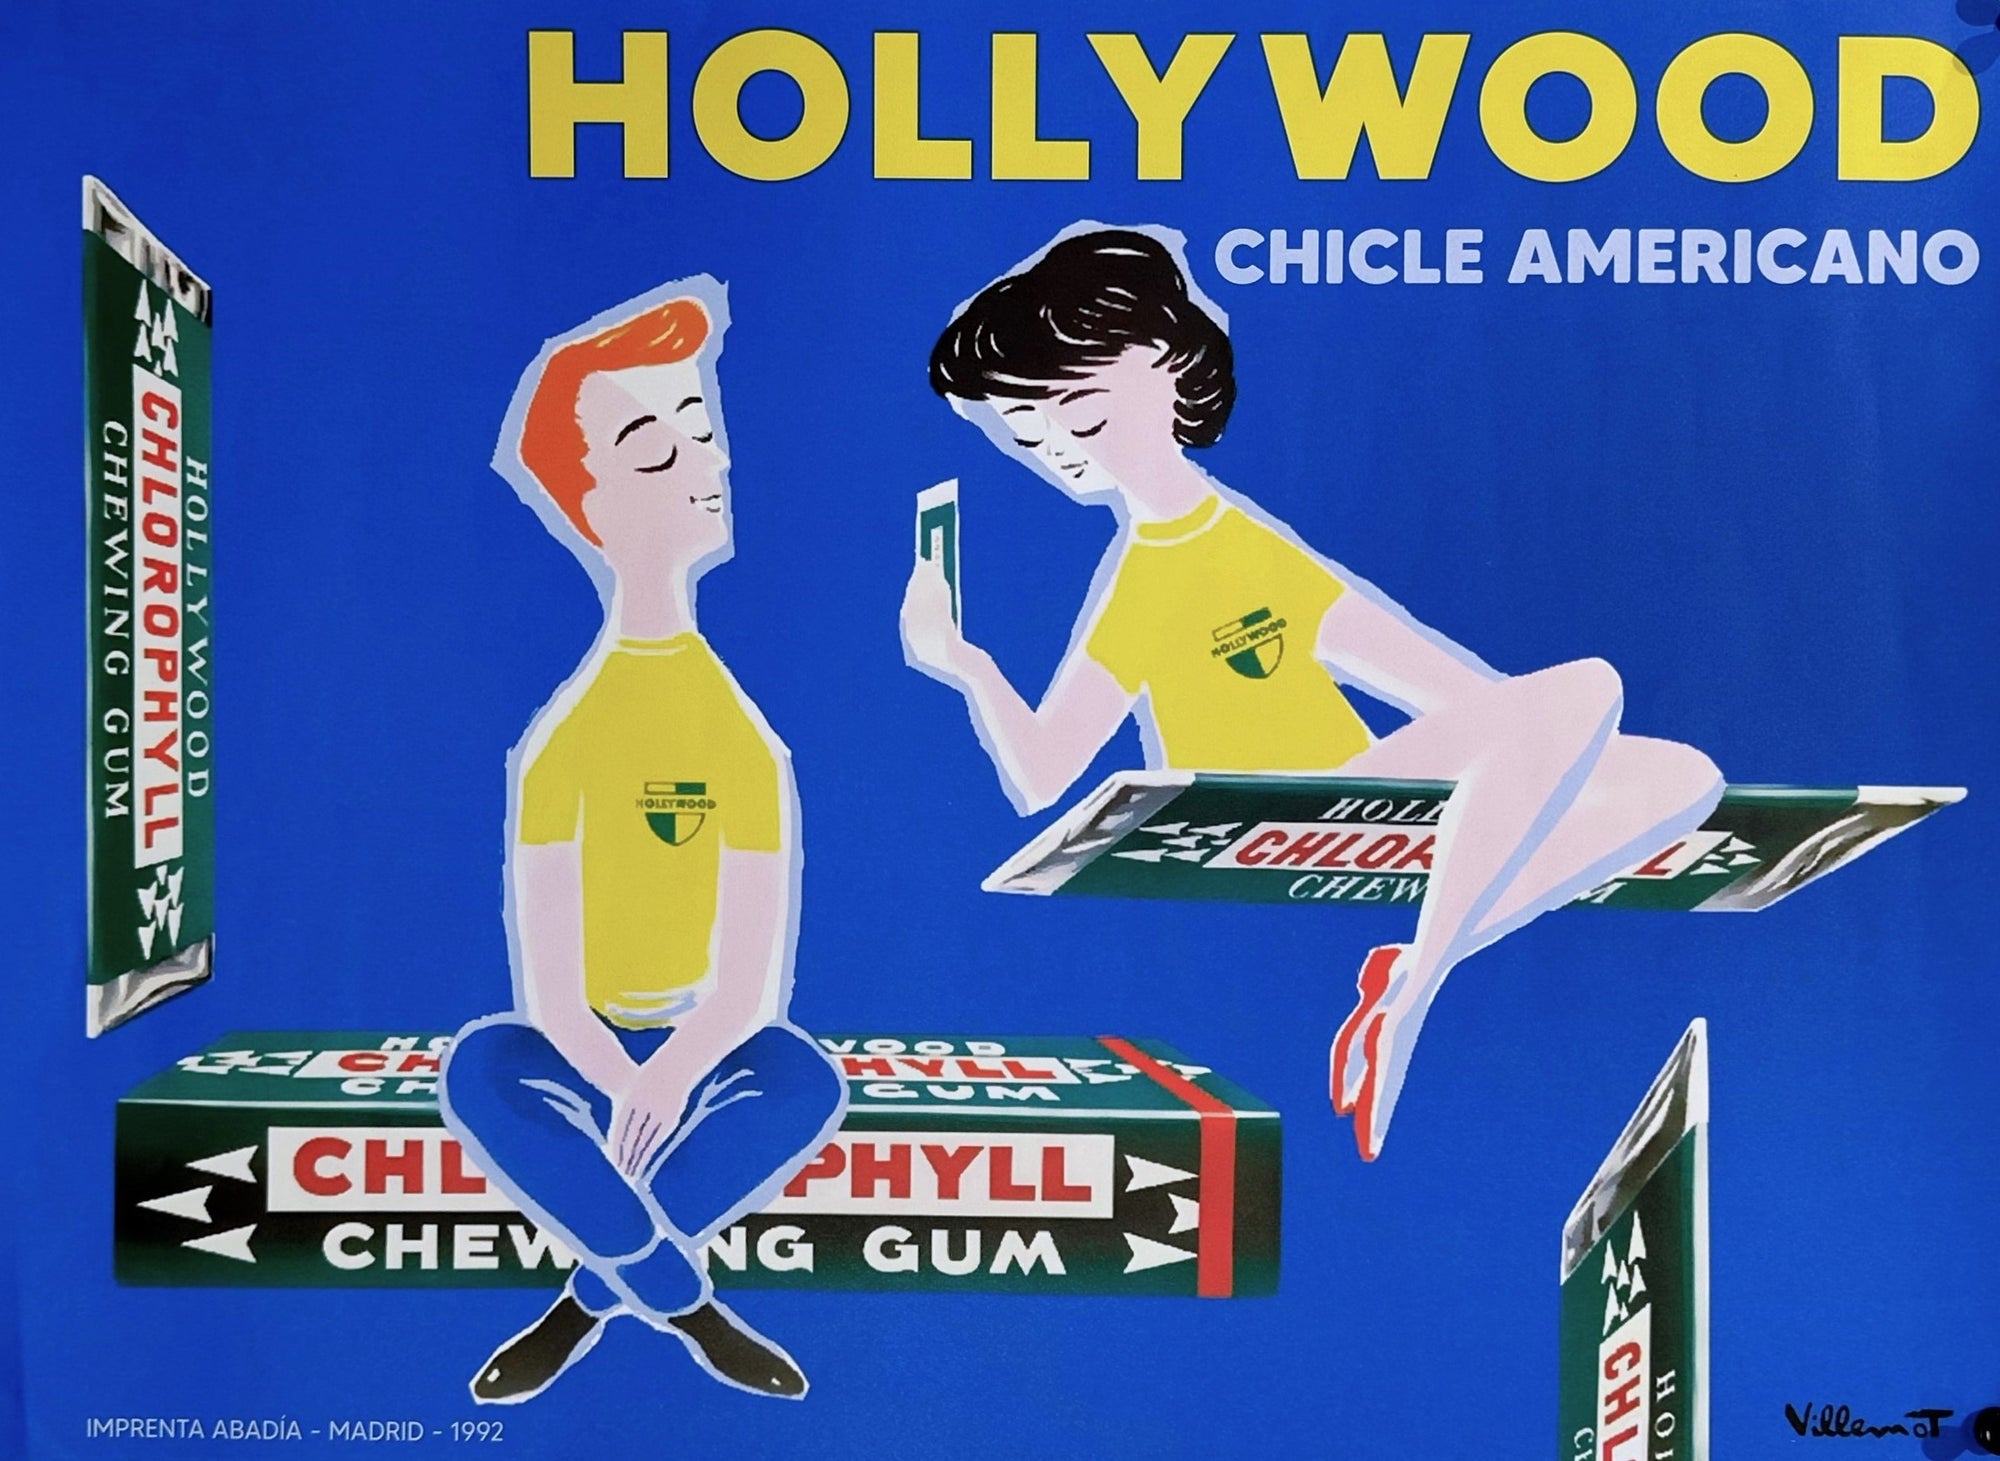 Hollywood- Chicle Americano by Villemot - Authentic Vintage Poster